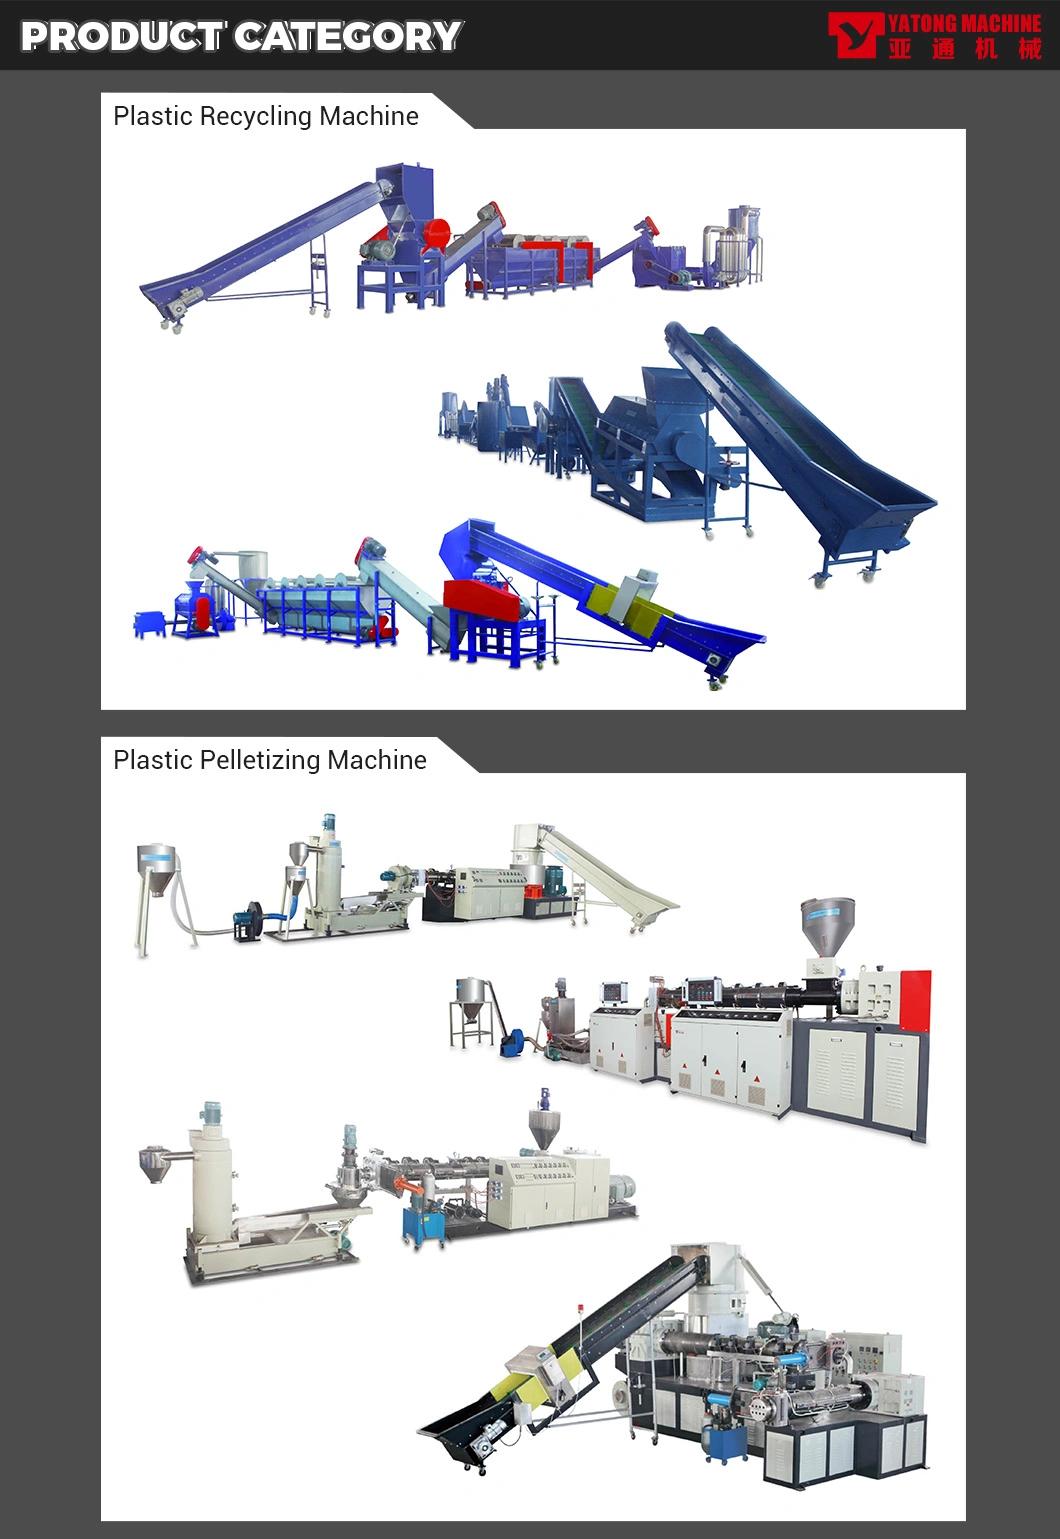 Customized Single Screw Extruder HDPE Pipe Extrusion Line